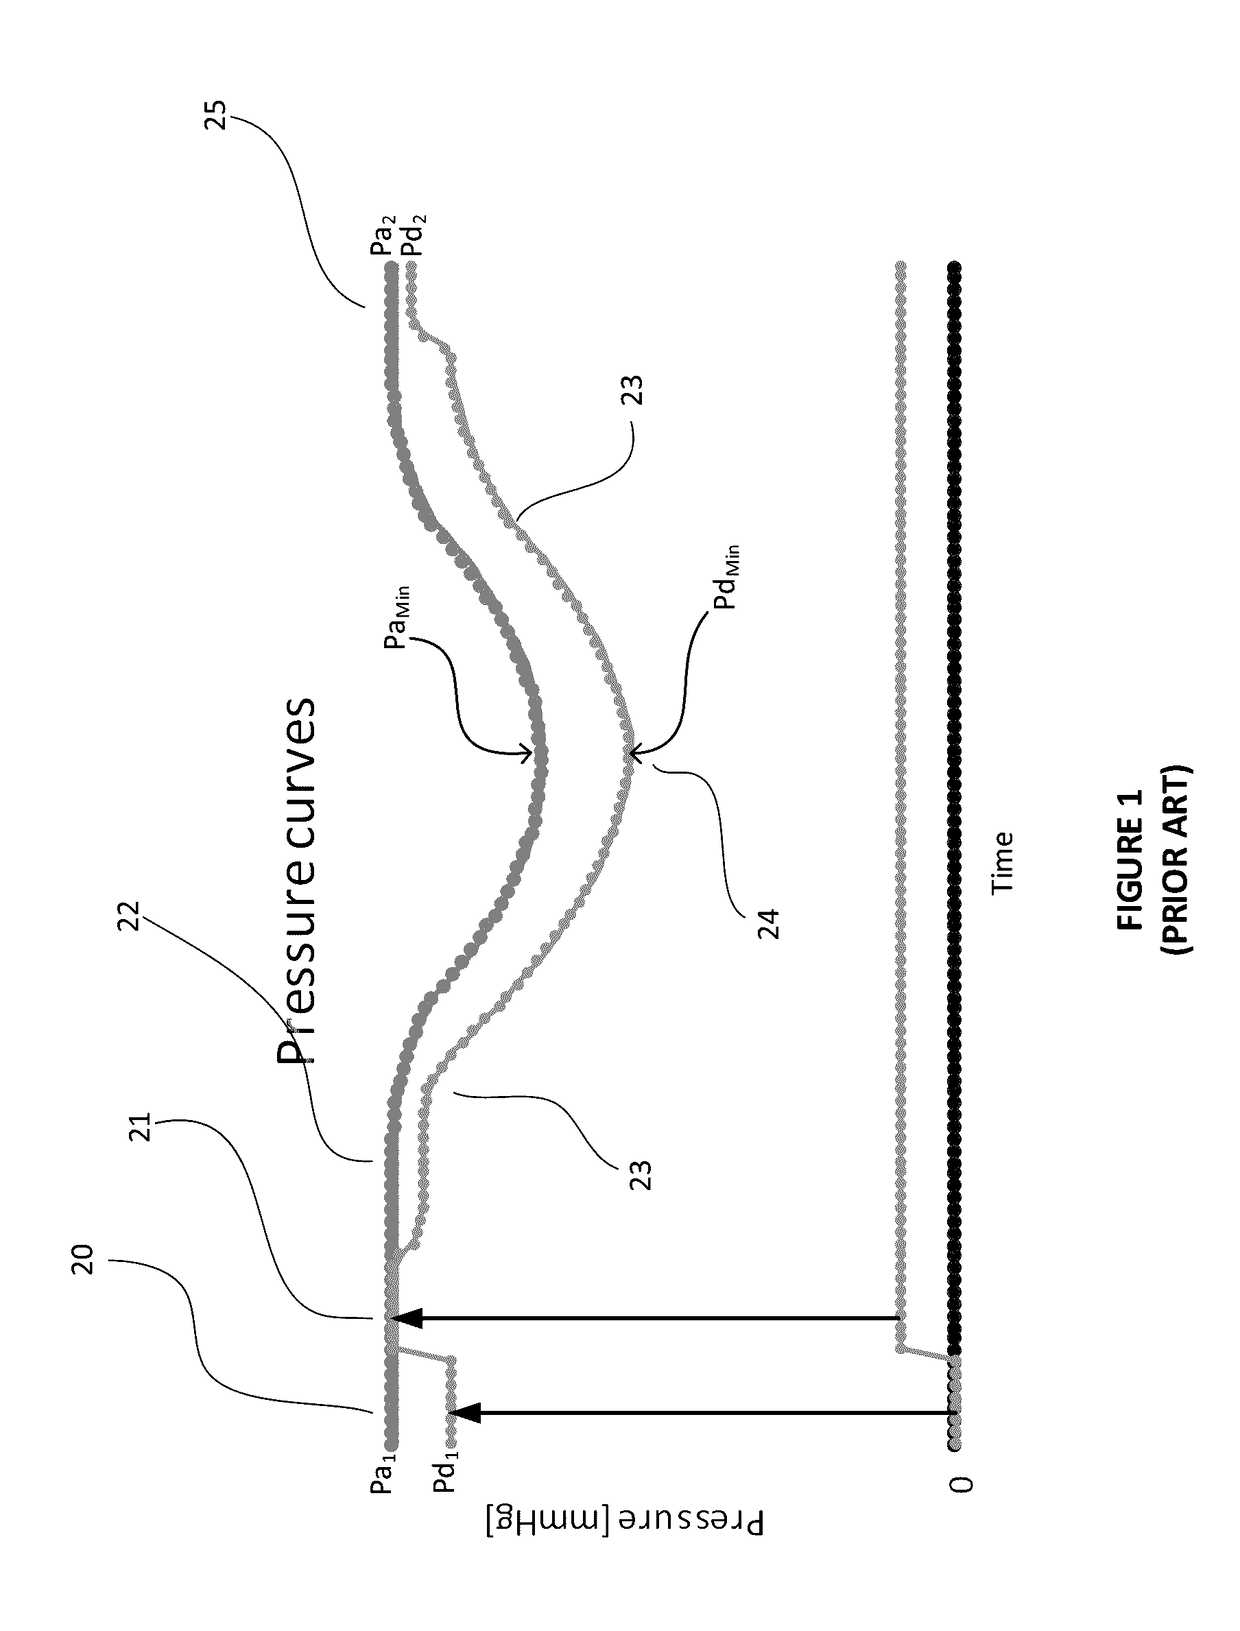 Method for pressure guidewire equalization